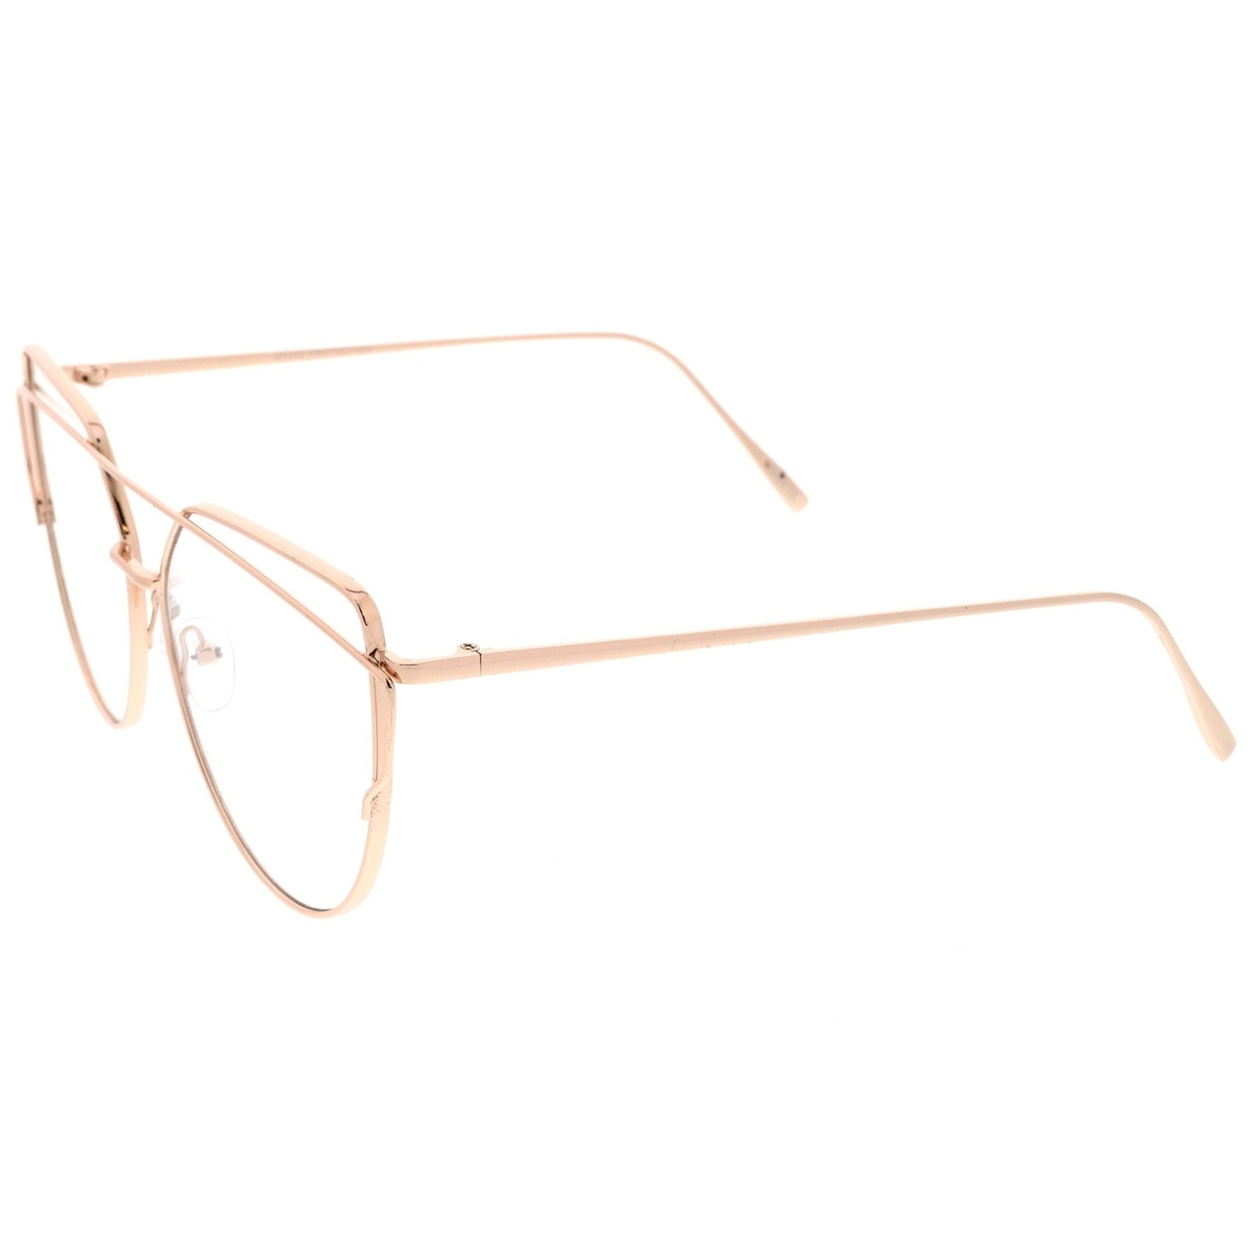 Oversize Metal Frame Thin Temple Clear Flat Lens Aviator Eyeglasses 62mm - Gold / Clear